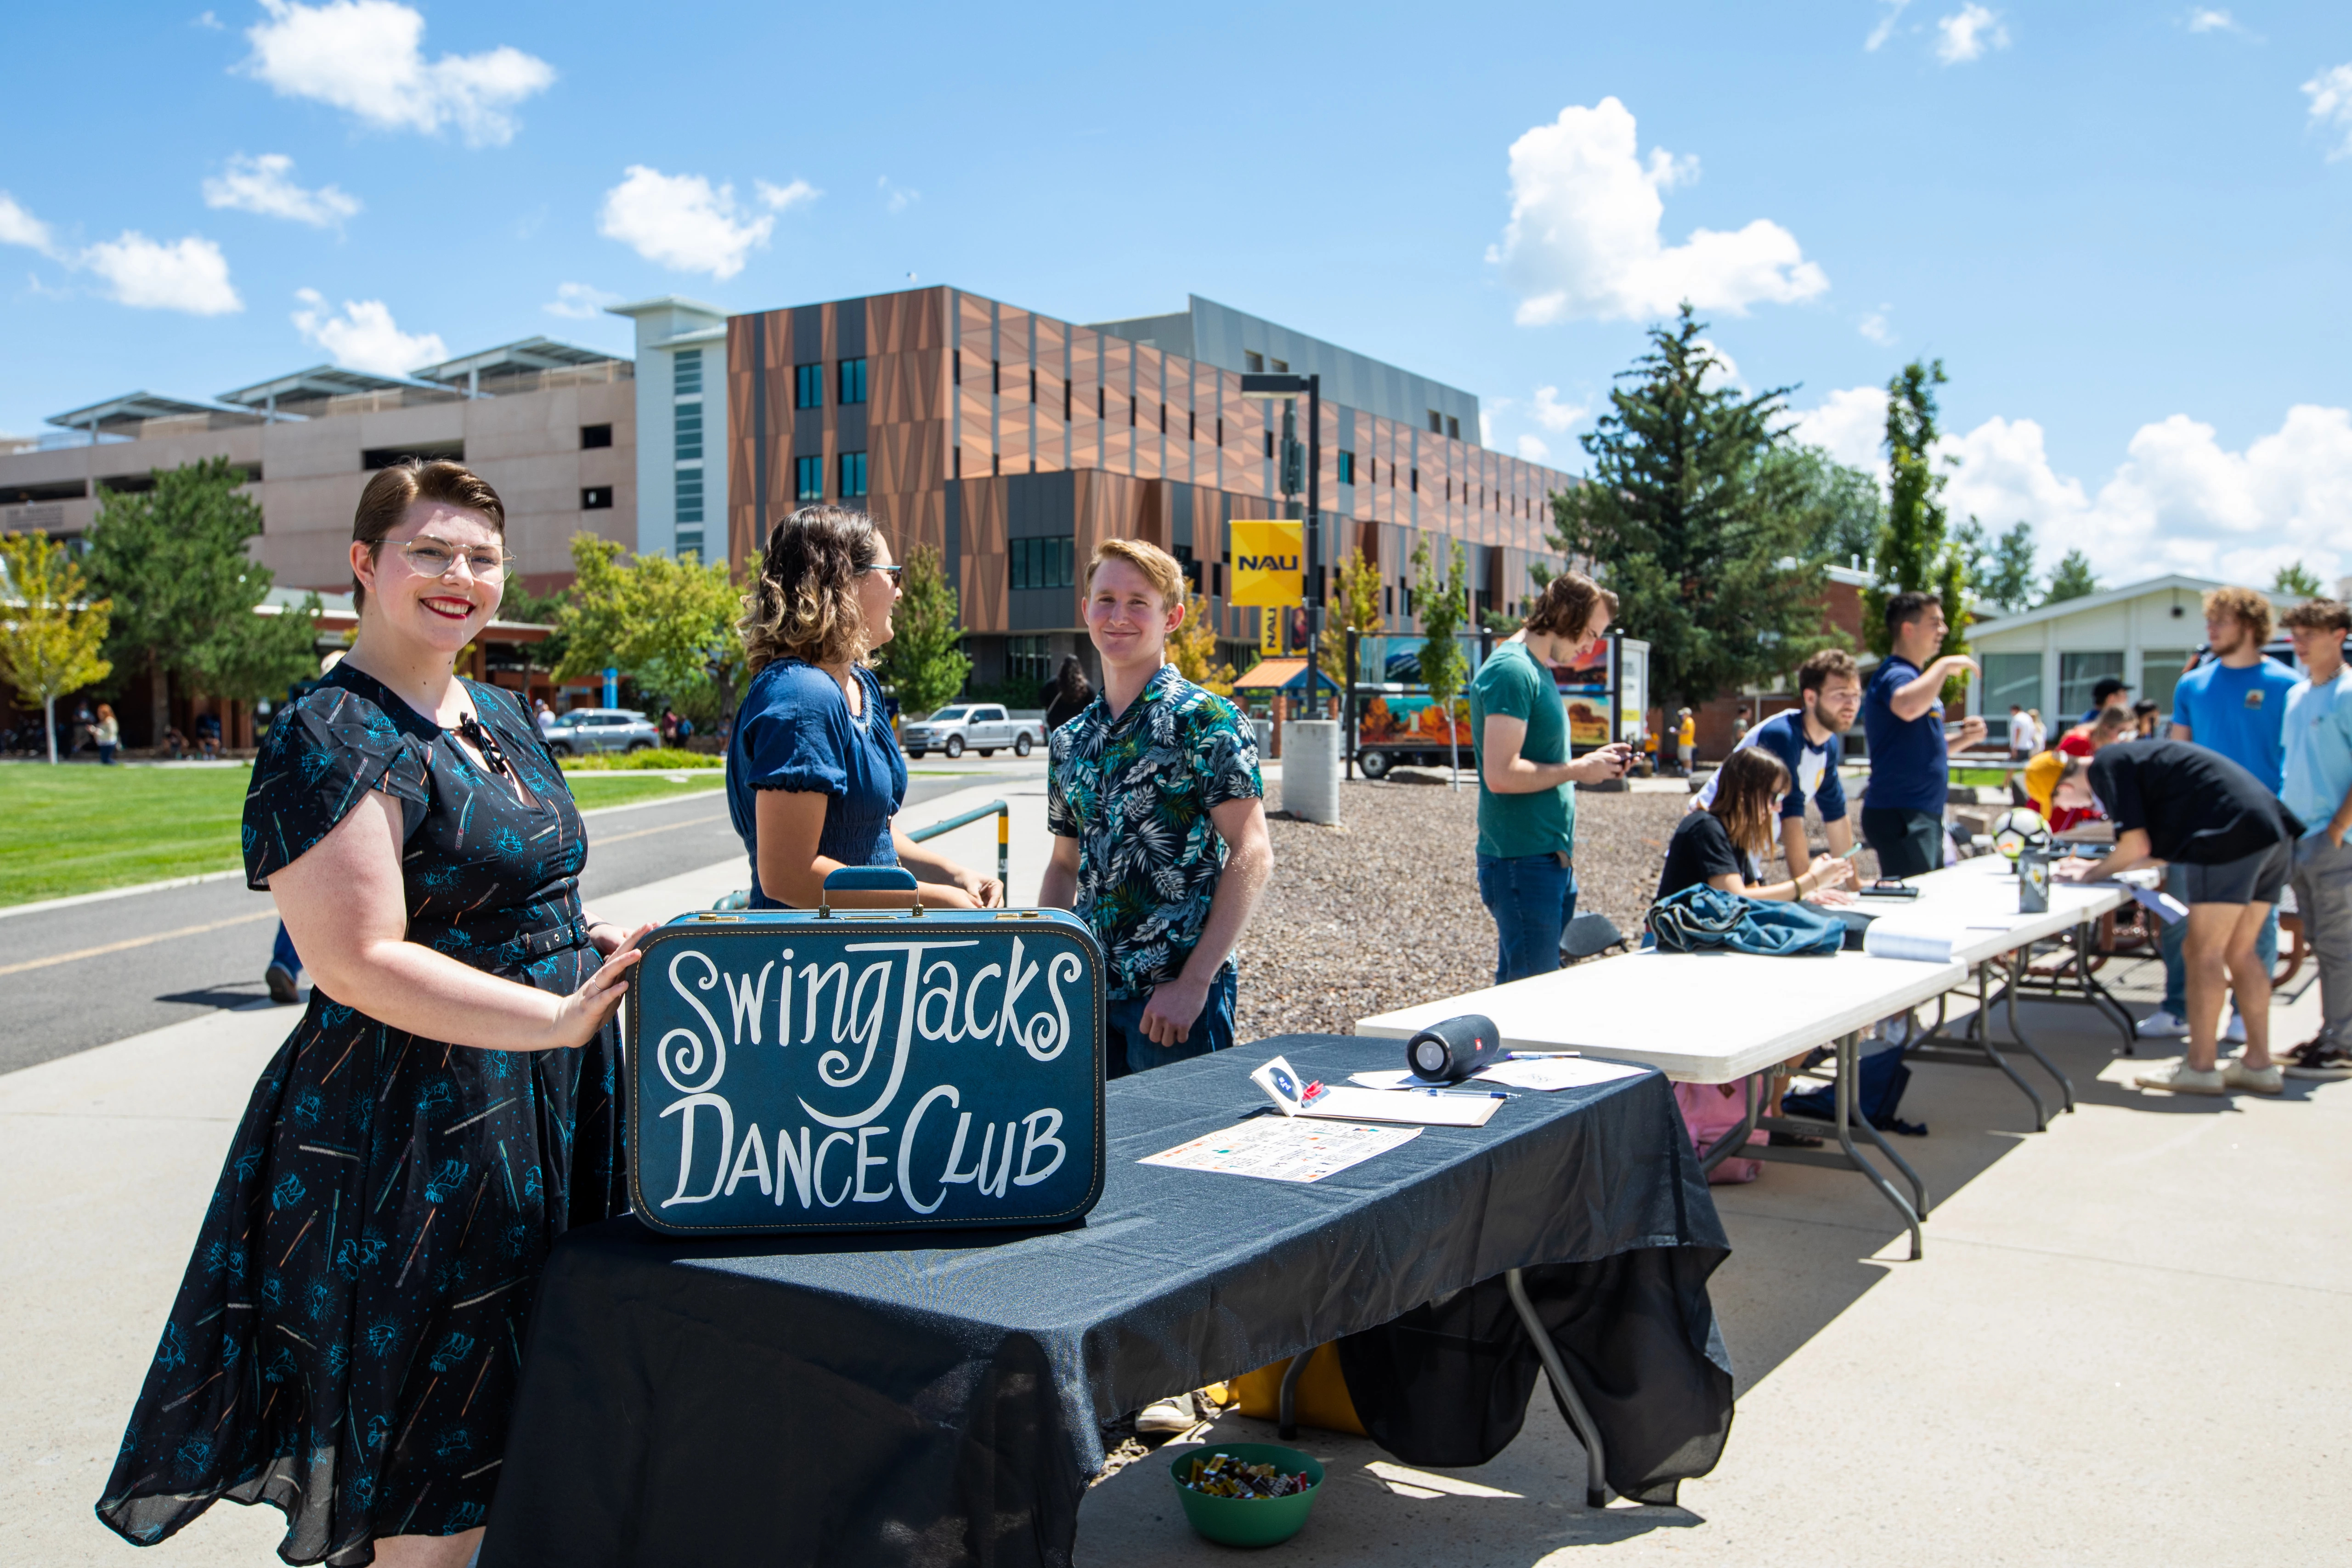 Students stand in front of Swing Jacks Dance Club table outside smiling.